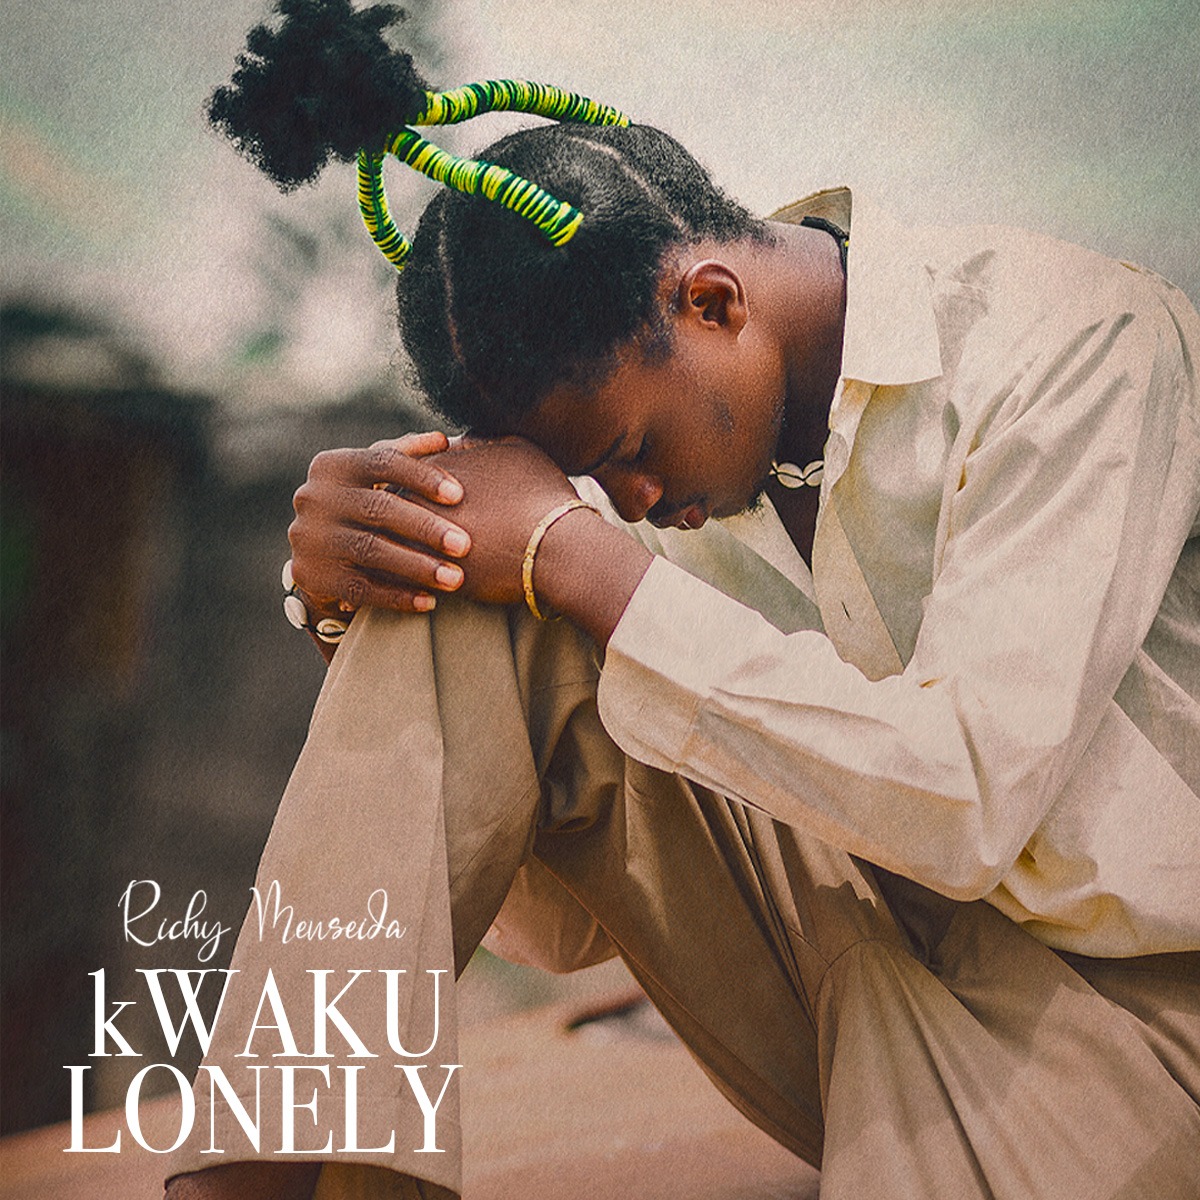 Richy Menseida Out With “Kwaku Lonely” The Spiritual Tune